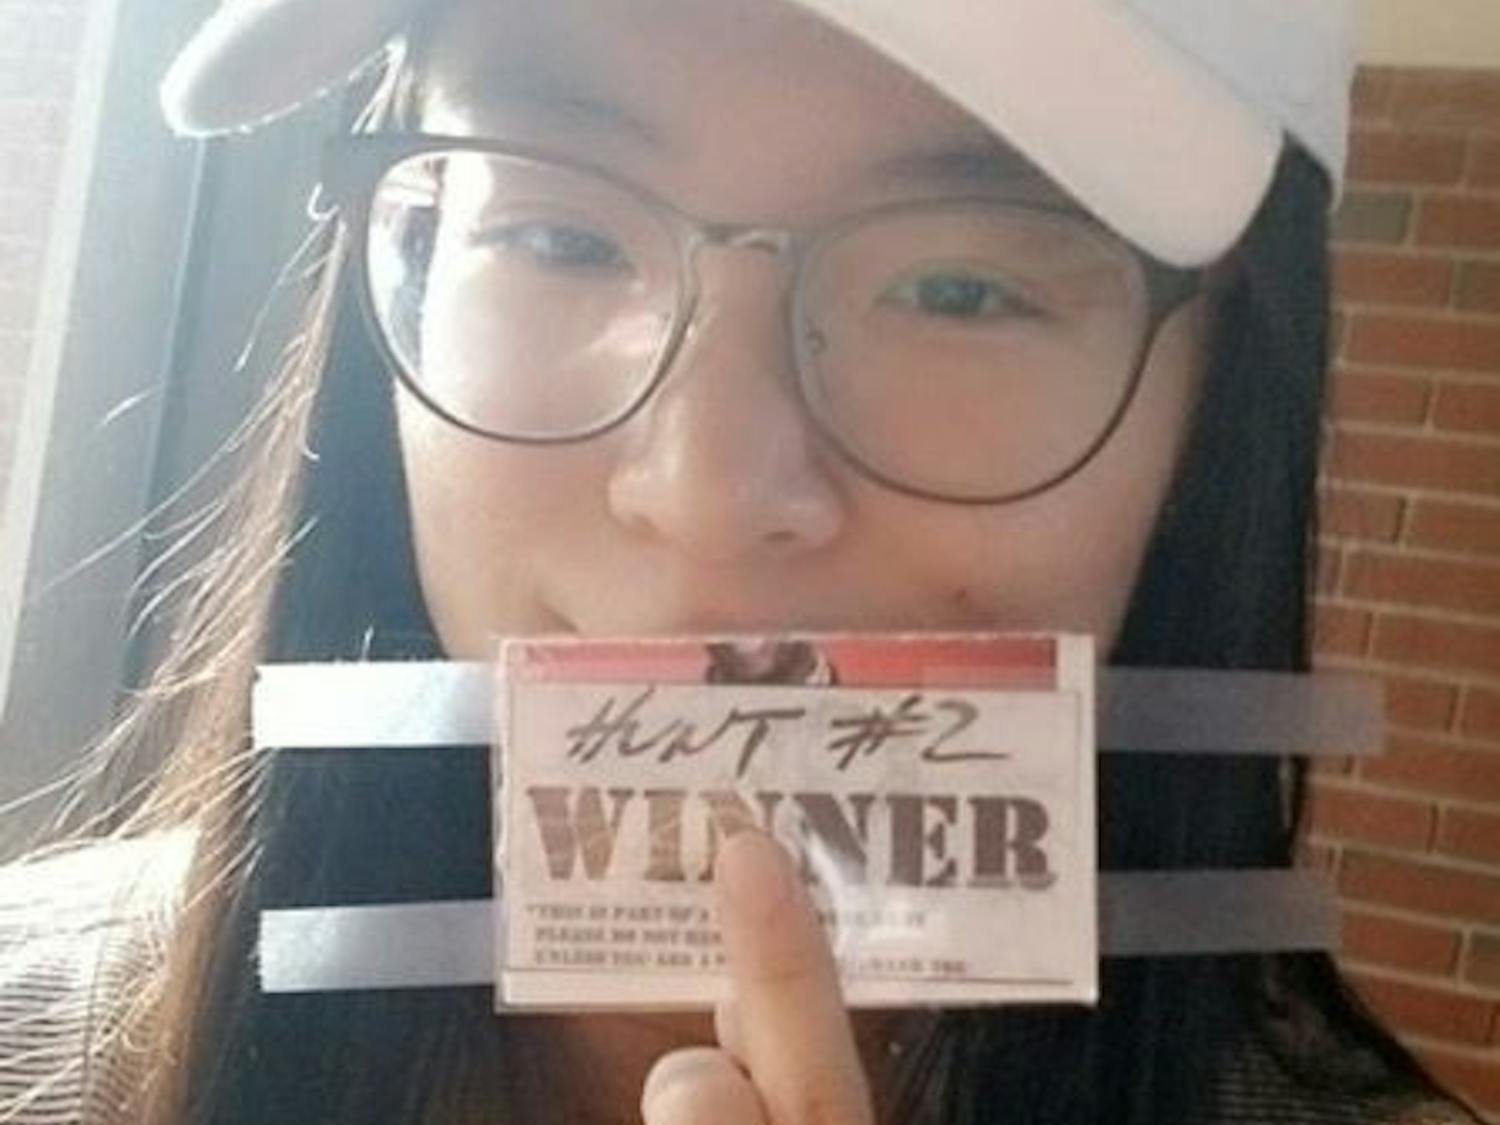 Sherry Kao, a UF biology sophomore, participated in Mini Treasure Hunts around the UF campus, a Facebook page that advertises small-scale scavenger hunts. Kao, 19, won the second hunt Feb. 20.